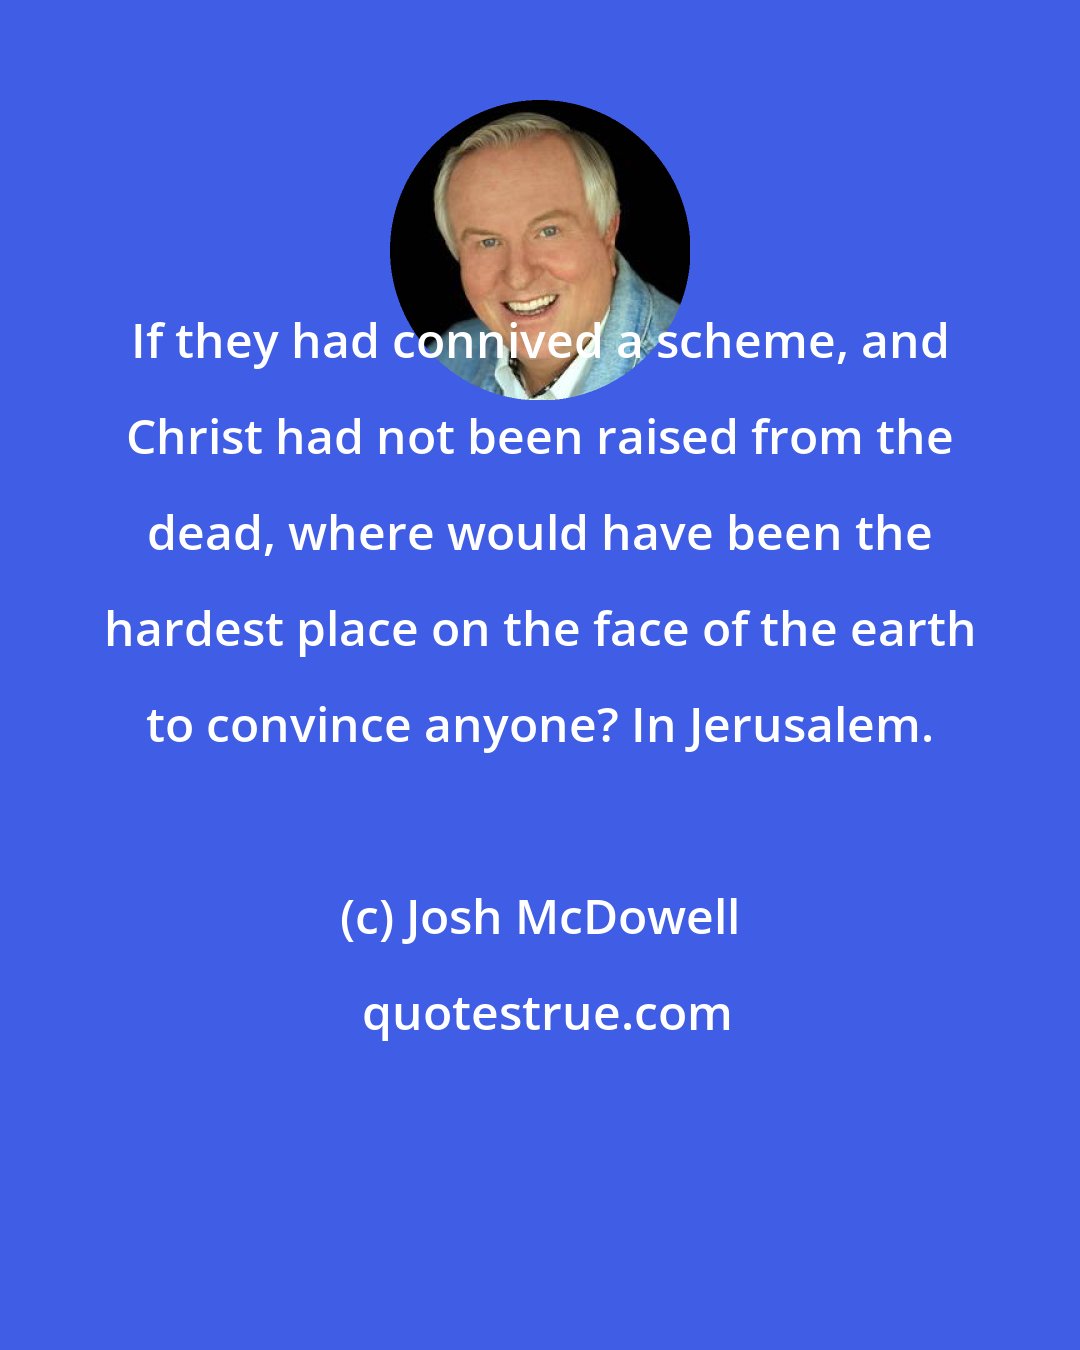 Josh McDowell: If they had connived a scheme, and Christ had not been raised from the dead, where would have been the hardest place on the face of the earth to convince anyone? In Jerusalem.